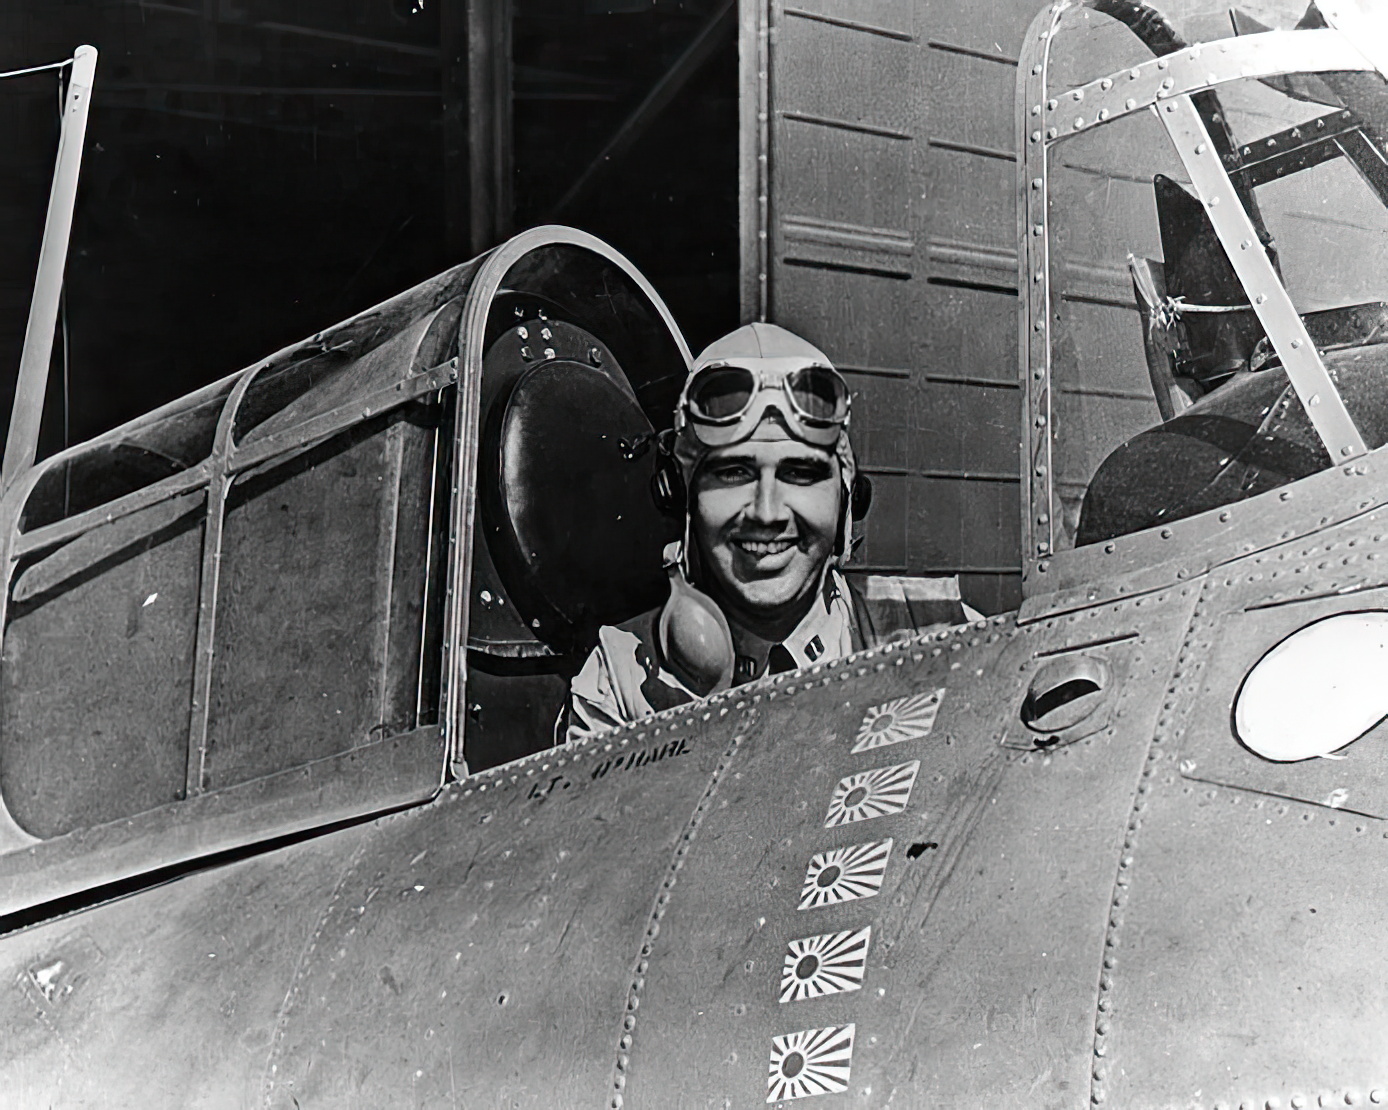 Lt. Butch O'Hare seated in the cockpit of his Grumman F4F "Wildcat" fighter, circa spring 1942. The plane is marked with five Japanese flags, representing the five enemy bombers he was credited with shooting down